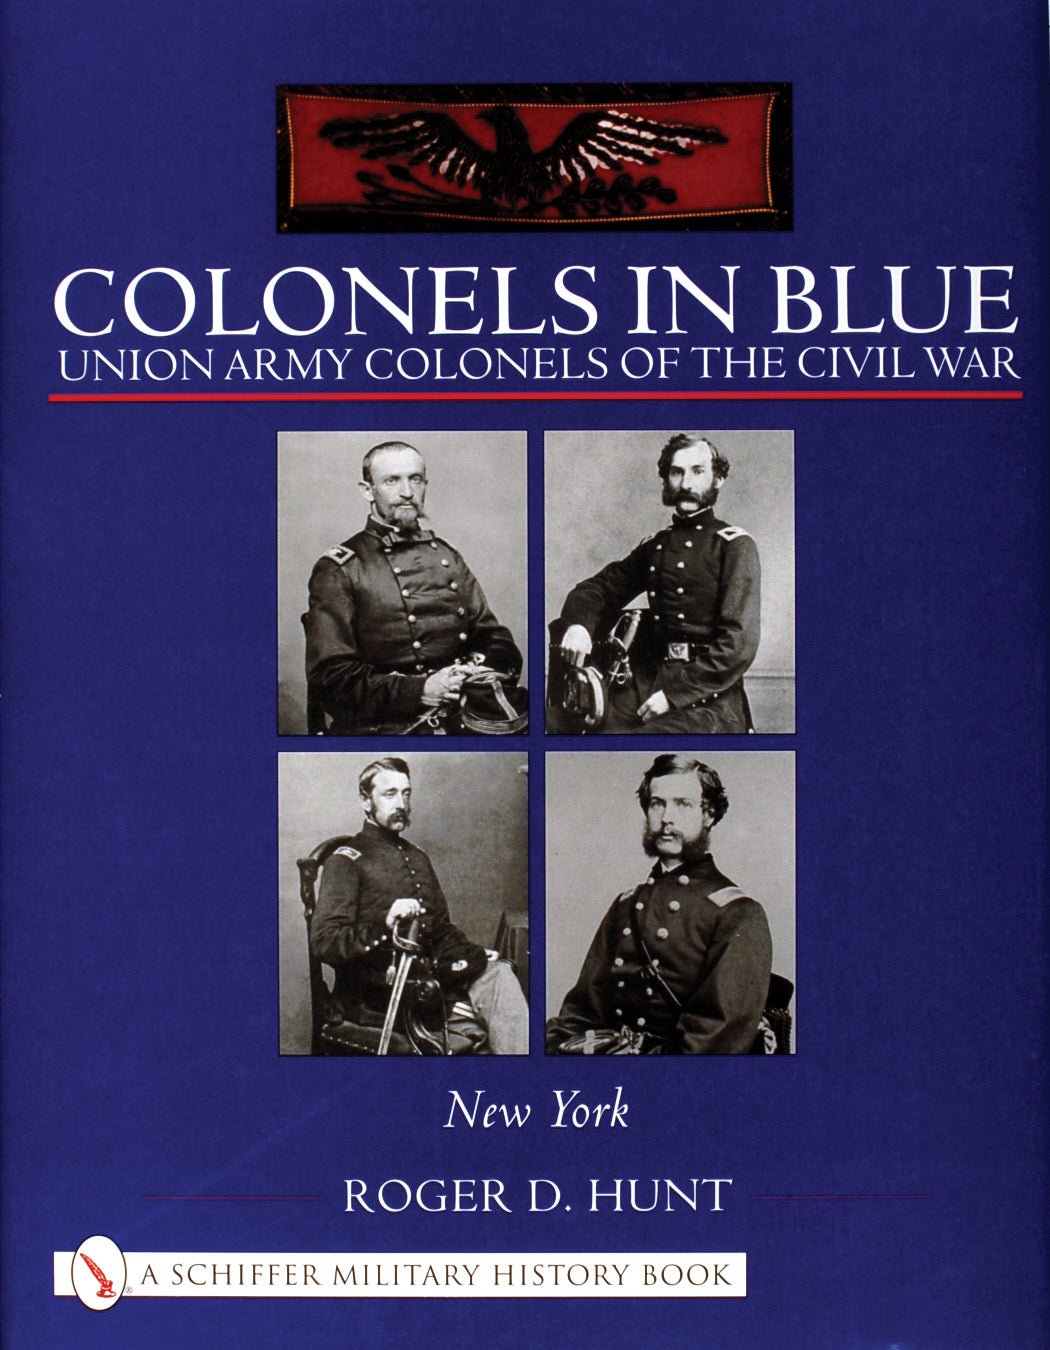 Colonels in Blue: Union Army Colonels of the Civil War